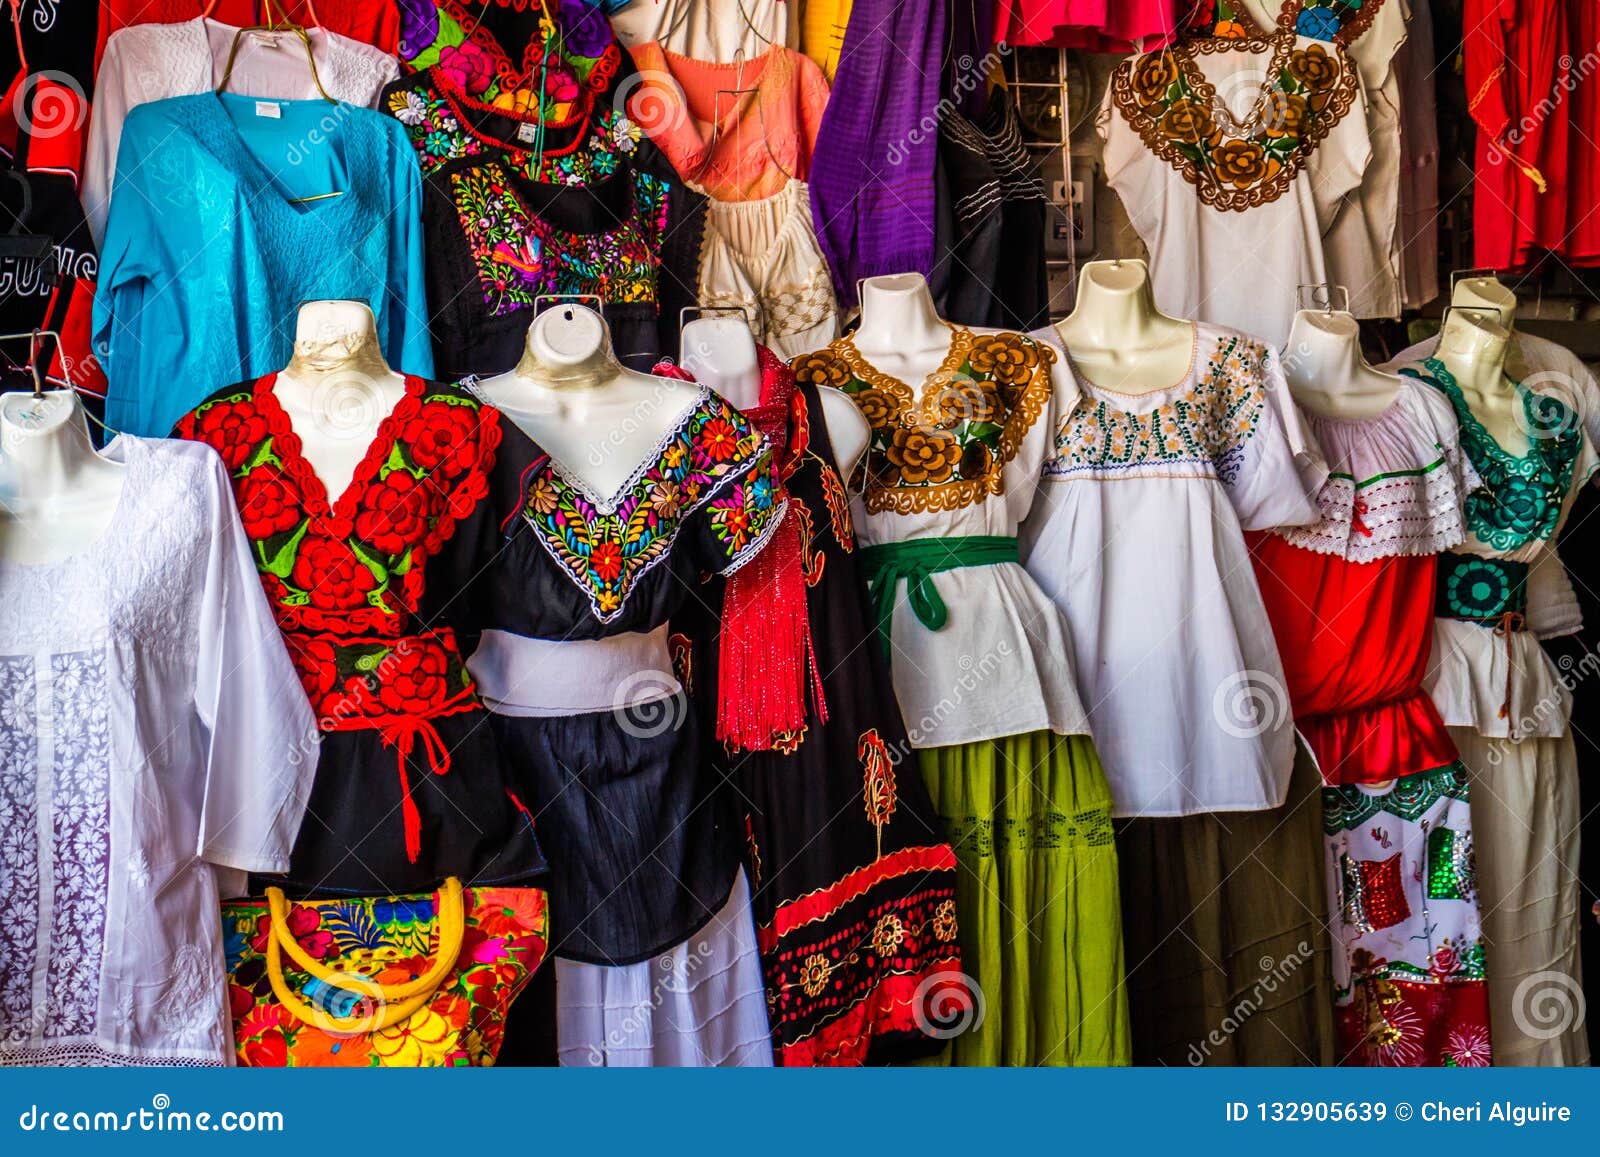 A Traditional Mexican Clothing in Nuevo Progreso, Mexico Stock Image ...